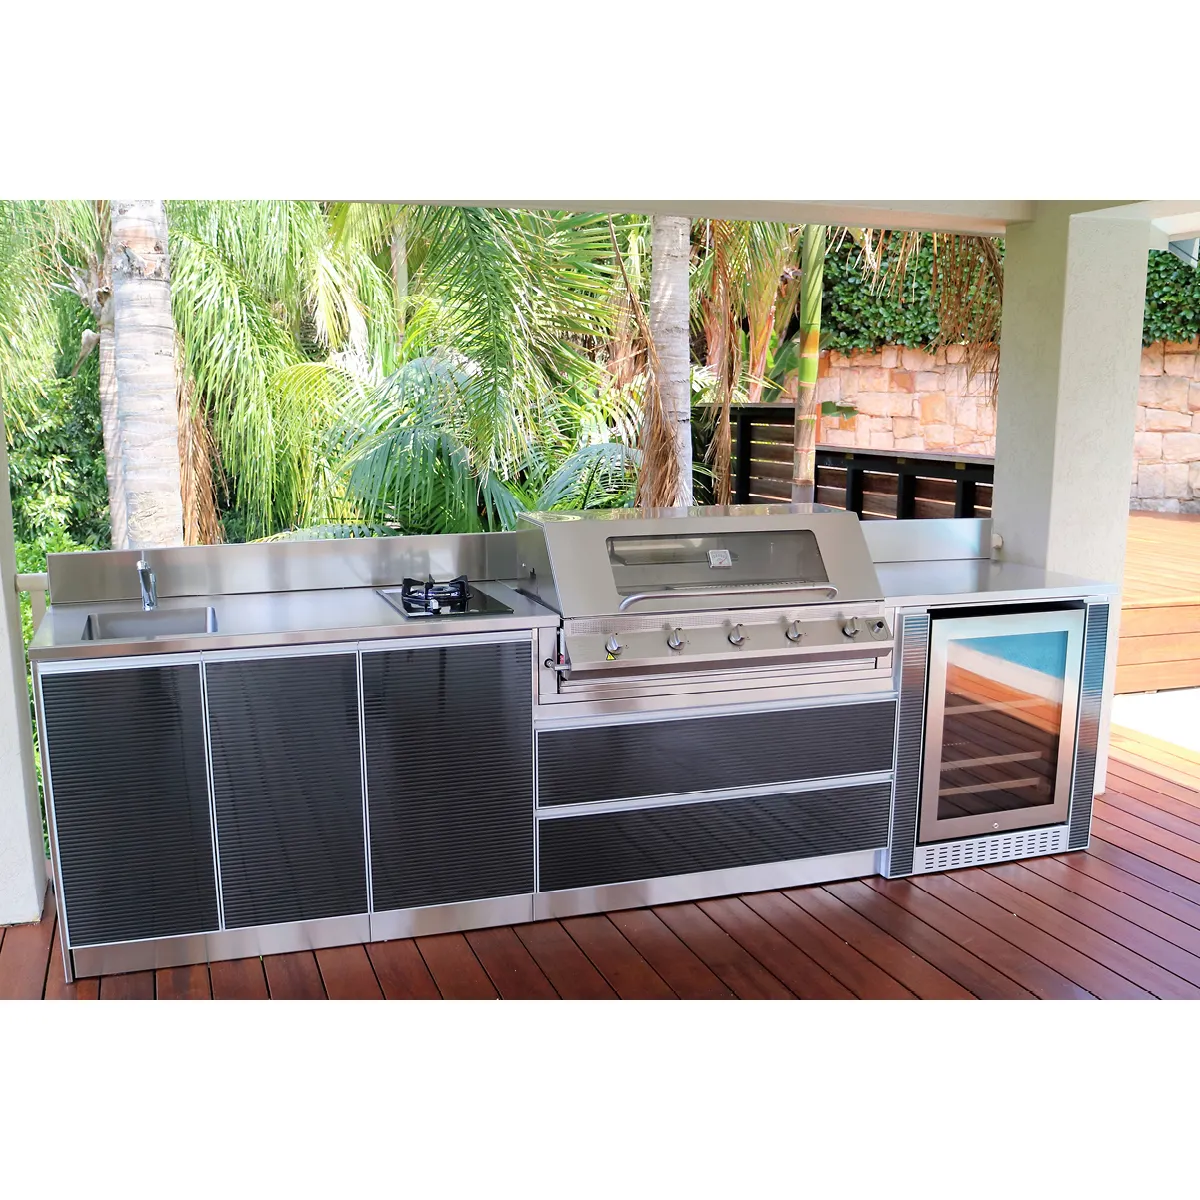 BBQ Island Outdoor Kitchen Grill With Fridge for House and Garden Made of 304 stainless steel